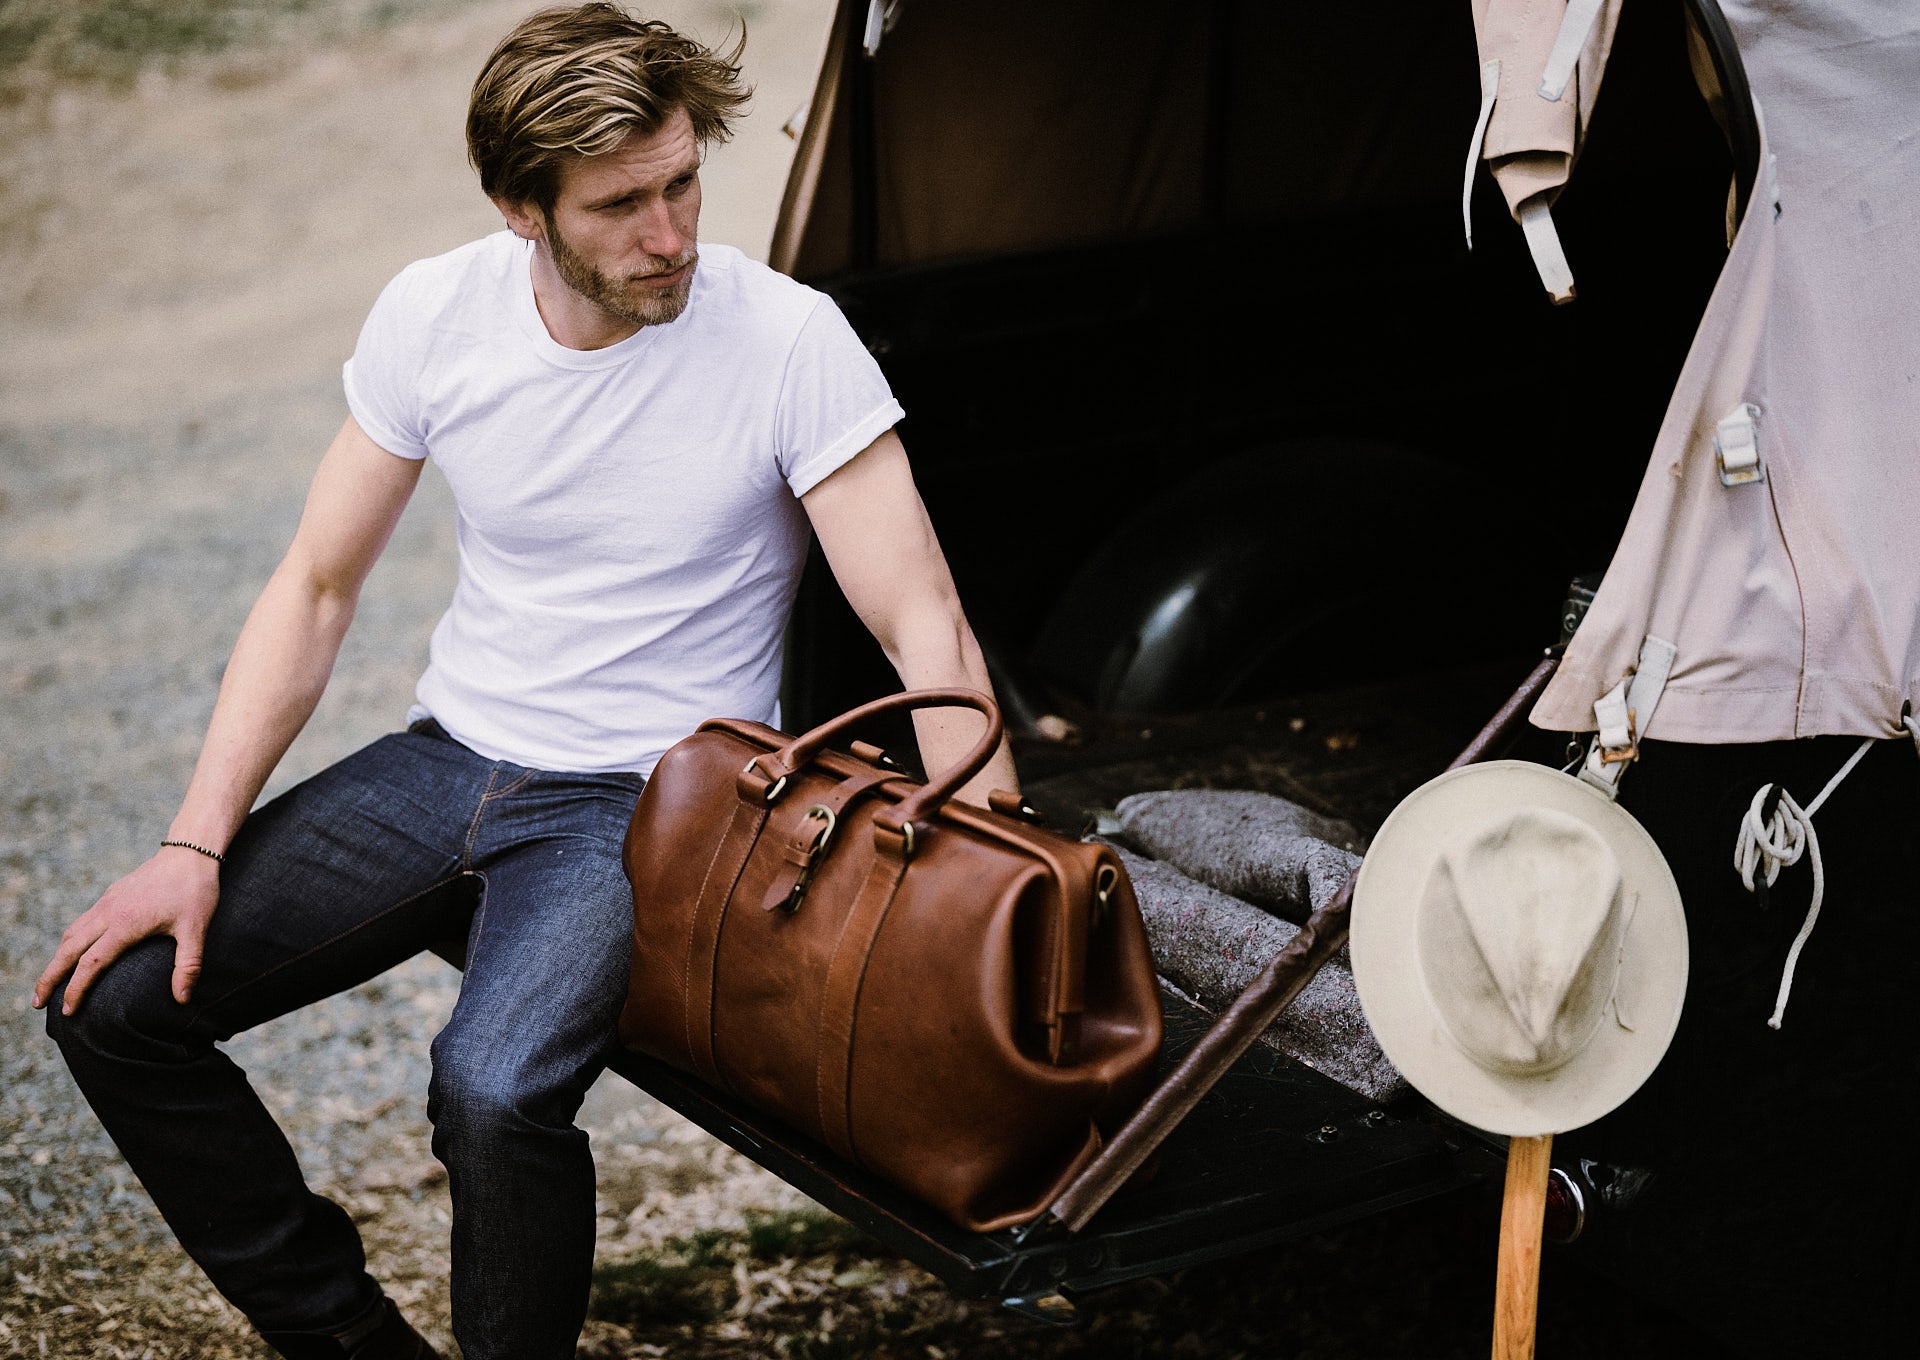 Pad & Quill Debuts the Gladstone Duffle Bag and Briefcase